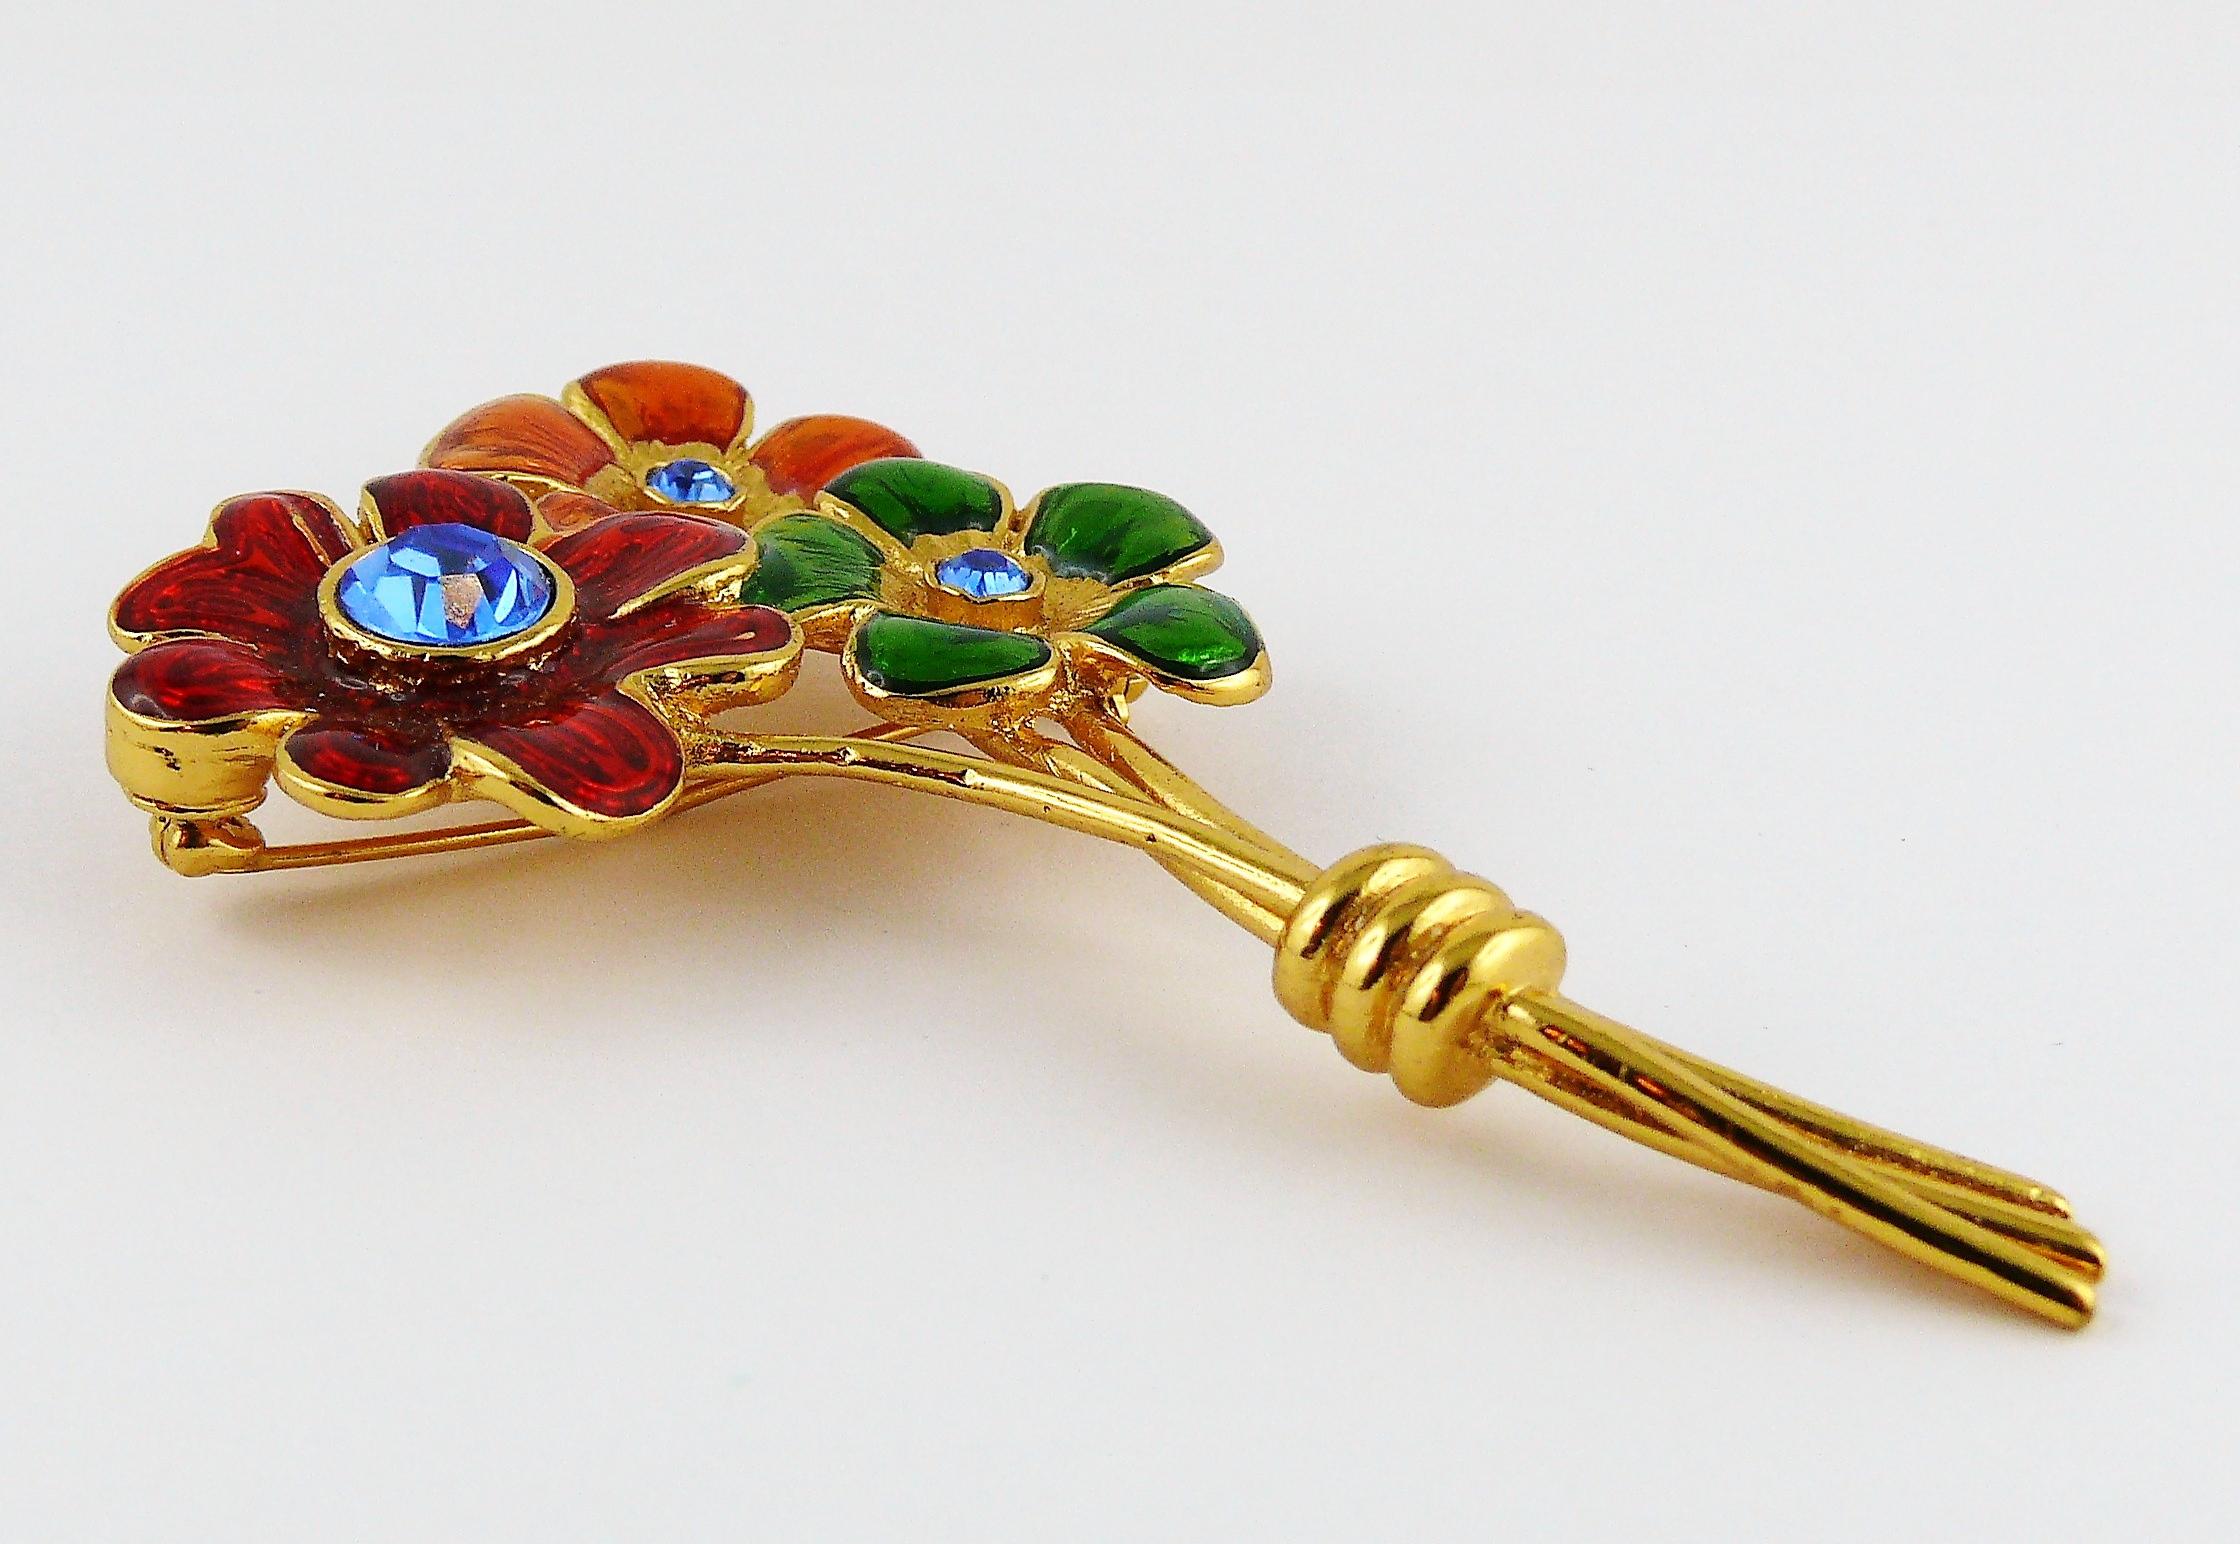 YVES SAINT LAURENT vintage floral spray brooch featuring multiocolored enamel and sapphire color crystals.

Embossed YSL Made in France.

Indicative measurements : max. height approx. 8 cm (3.15 inches) / max. width approx. 4 cm (1.57